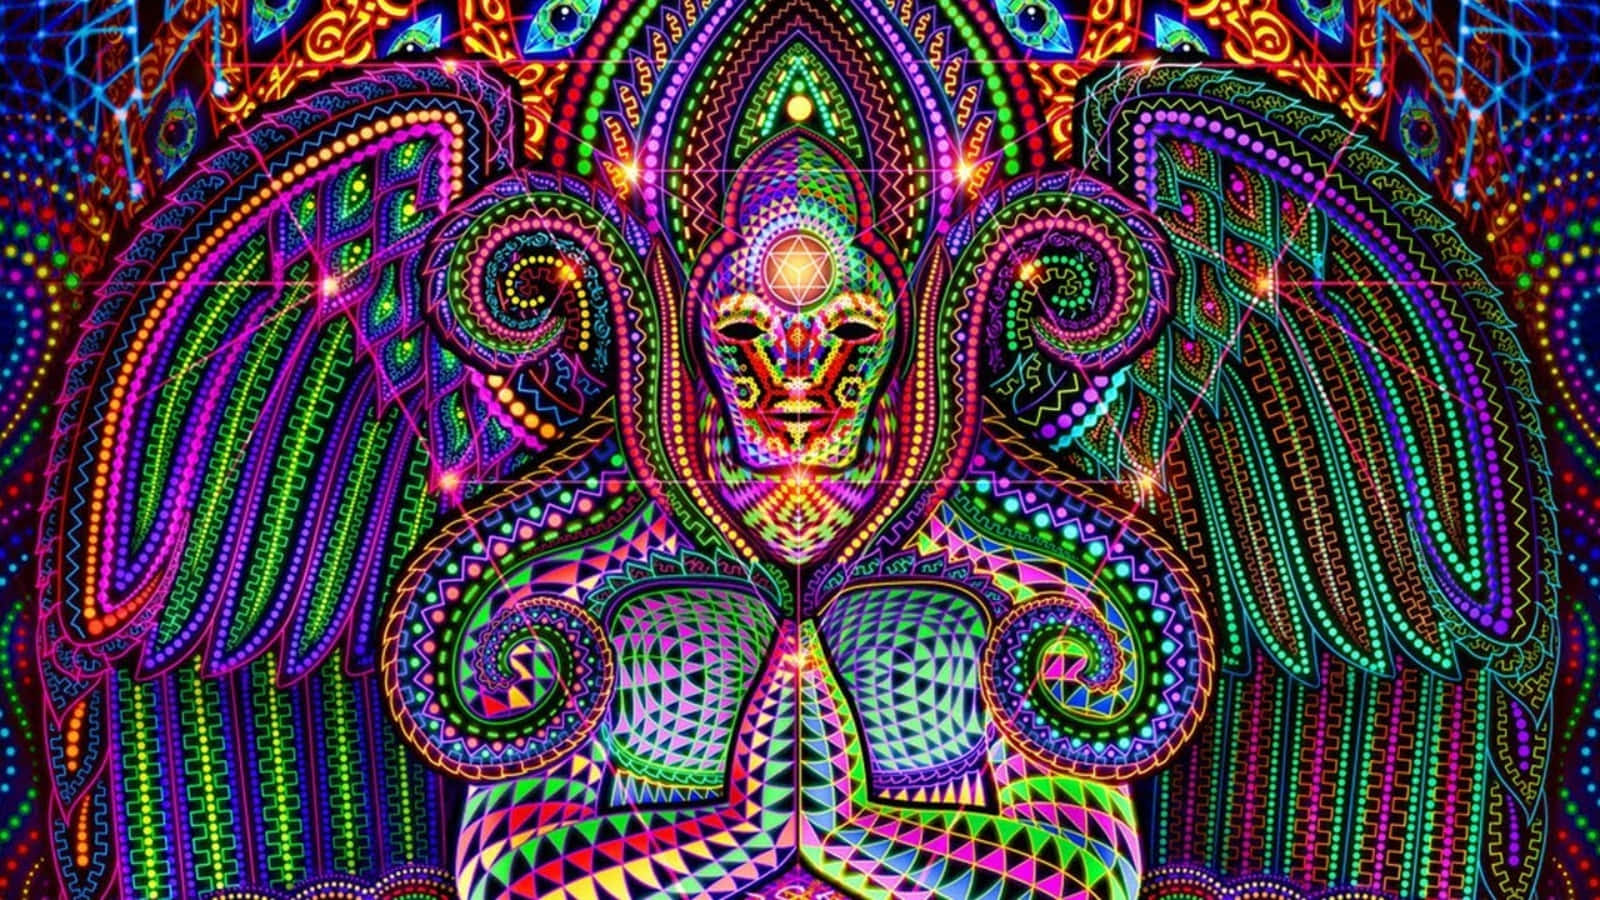 Exploring a vibrant psychedelic world